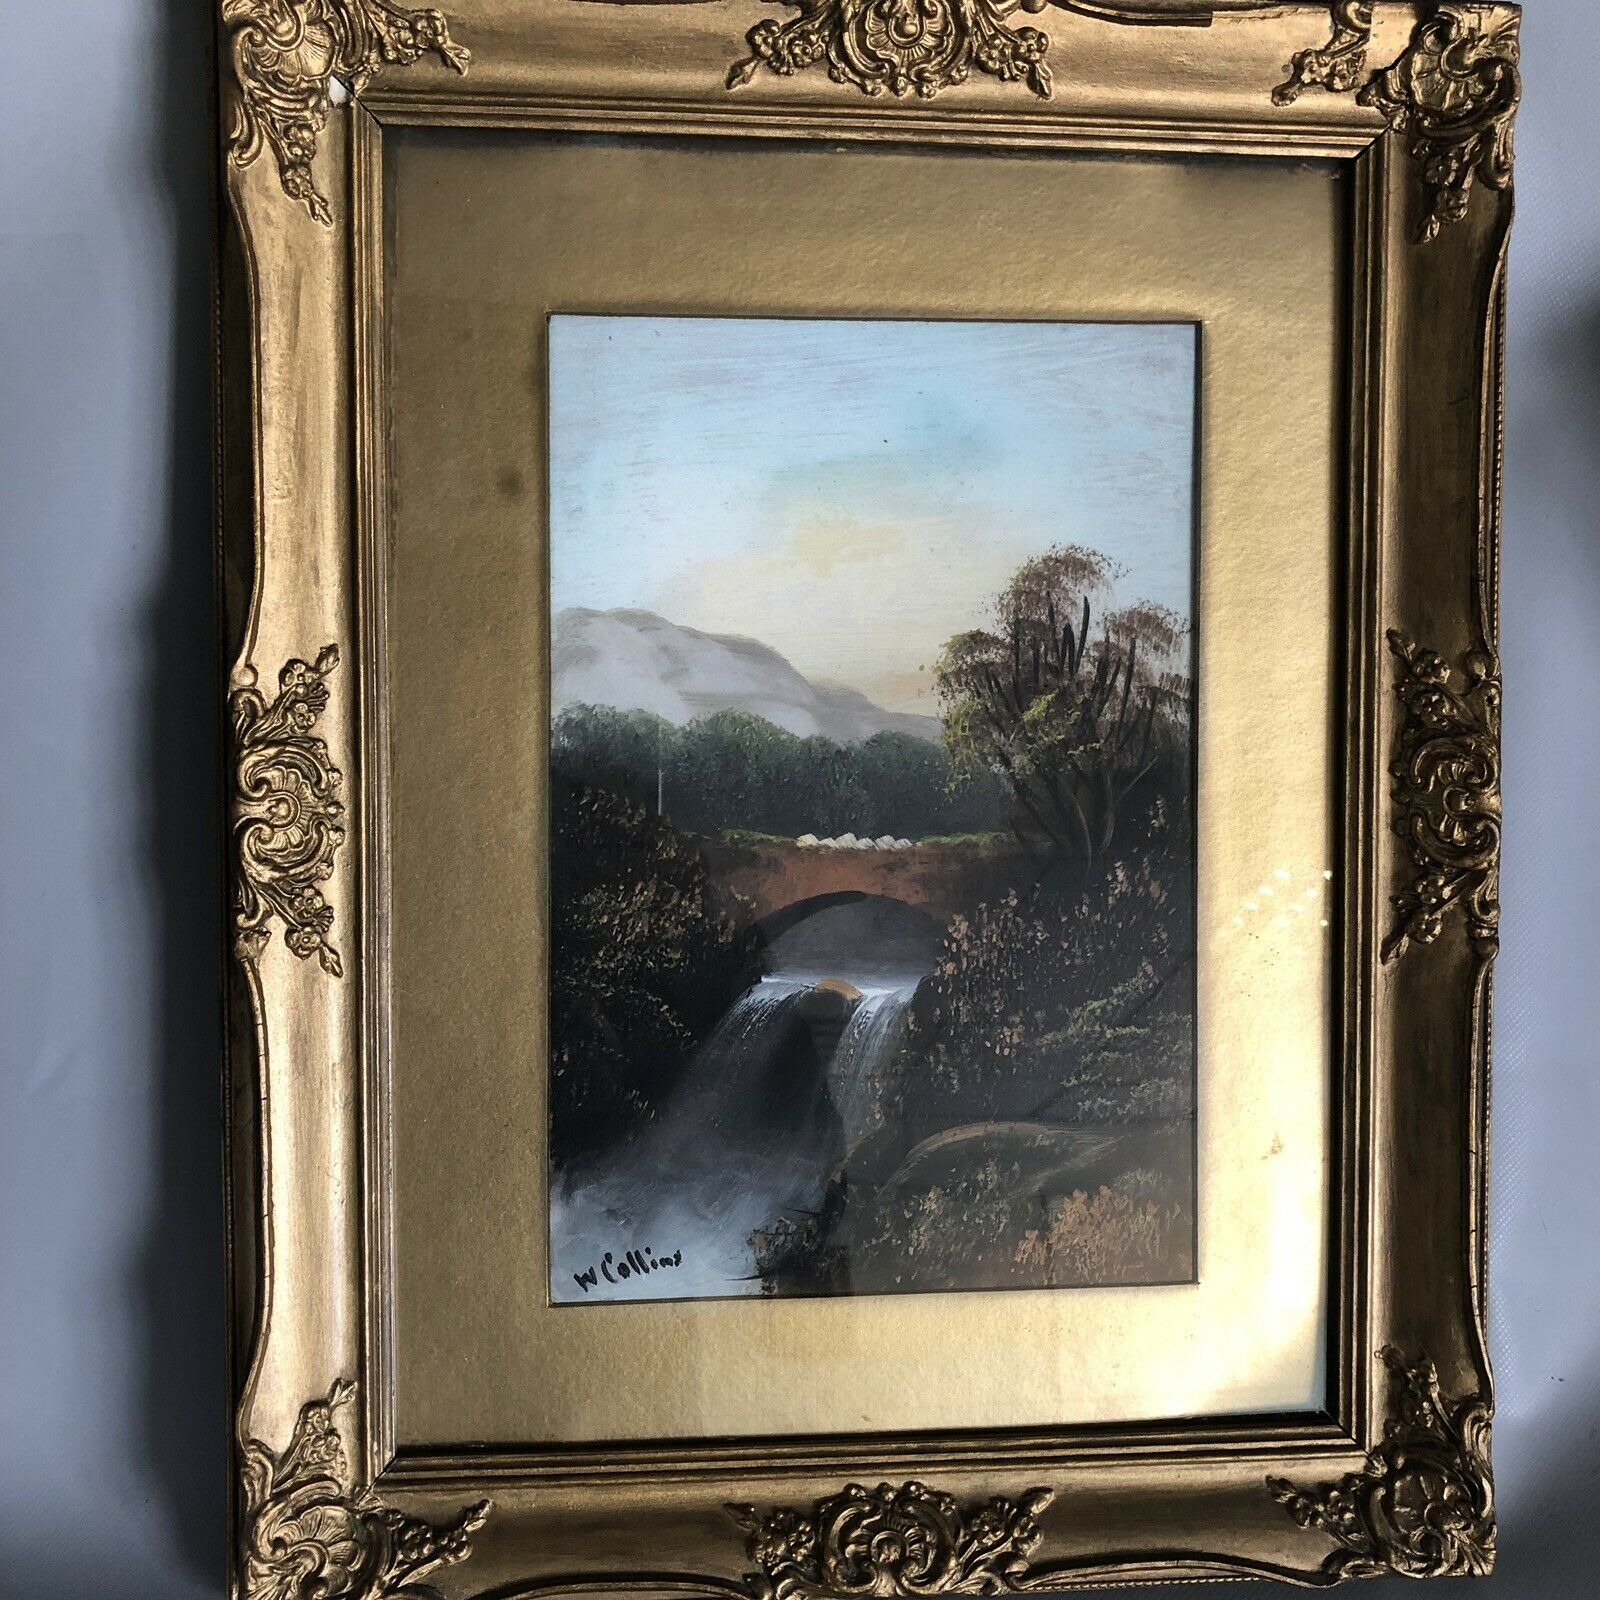 An Original Signed Antique 19th C. Oil on Board Painting Signed W COLLINS Waterfall and Bridge - Image 2 of 6